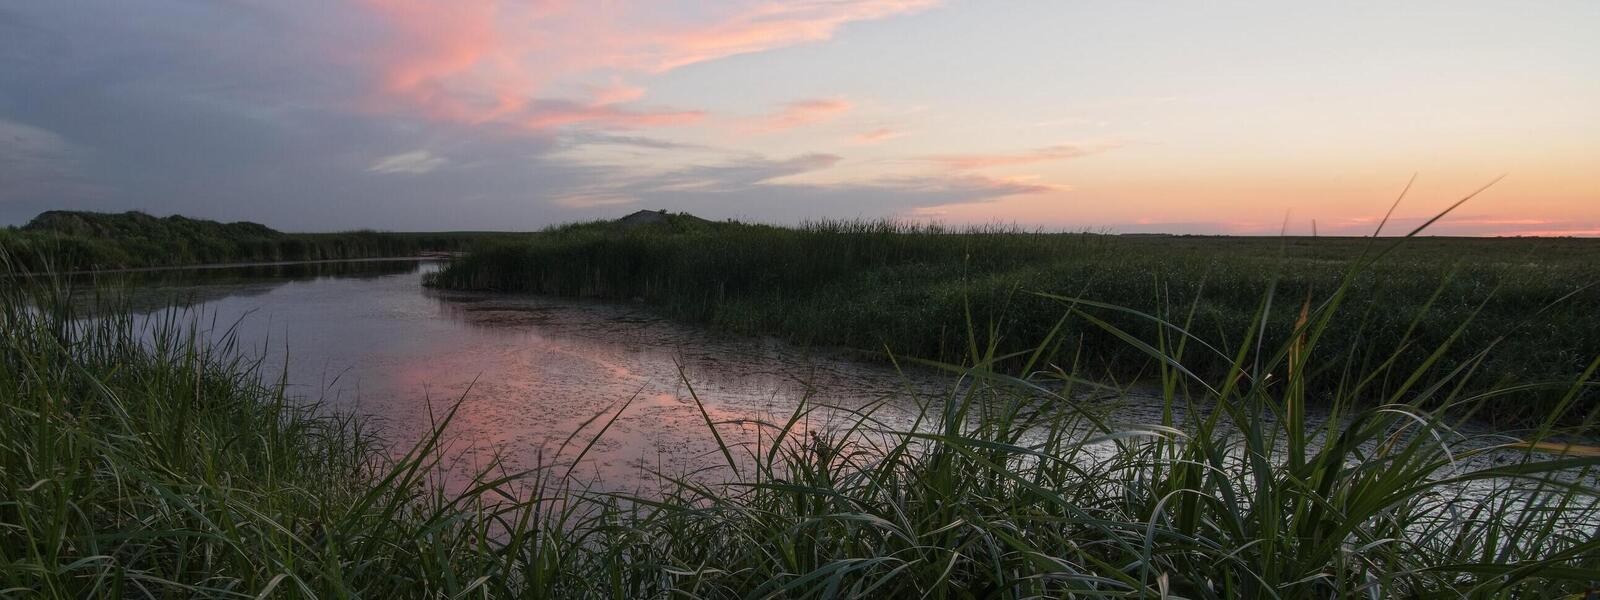 Grass in the foreground and water in the background with a colorful sky